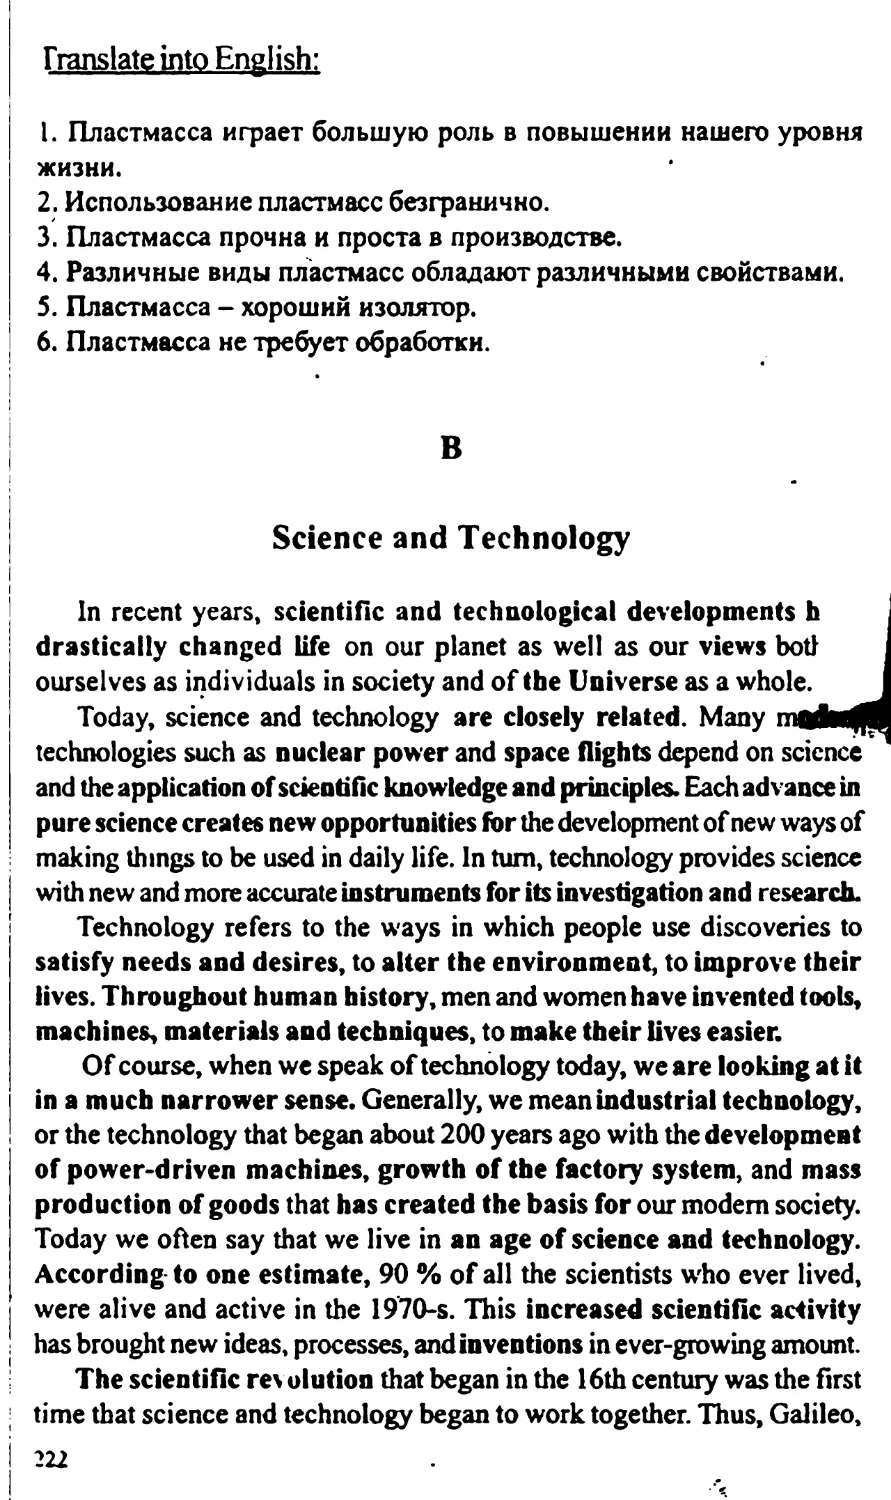 B. Science and Technology